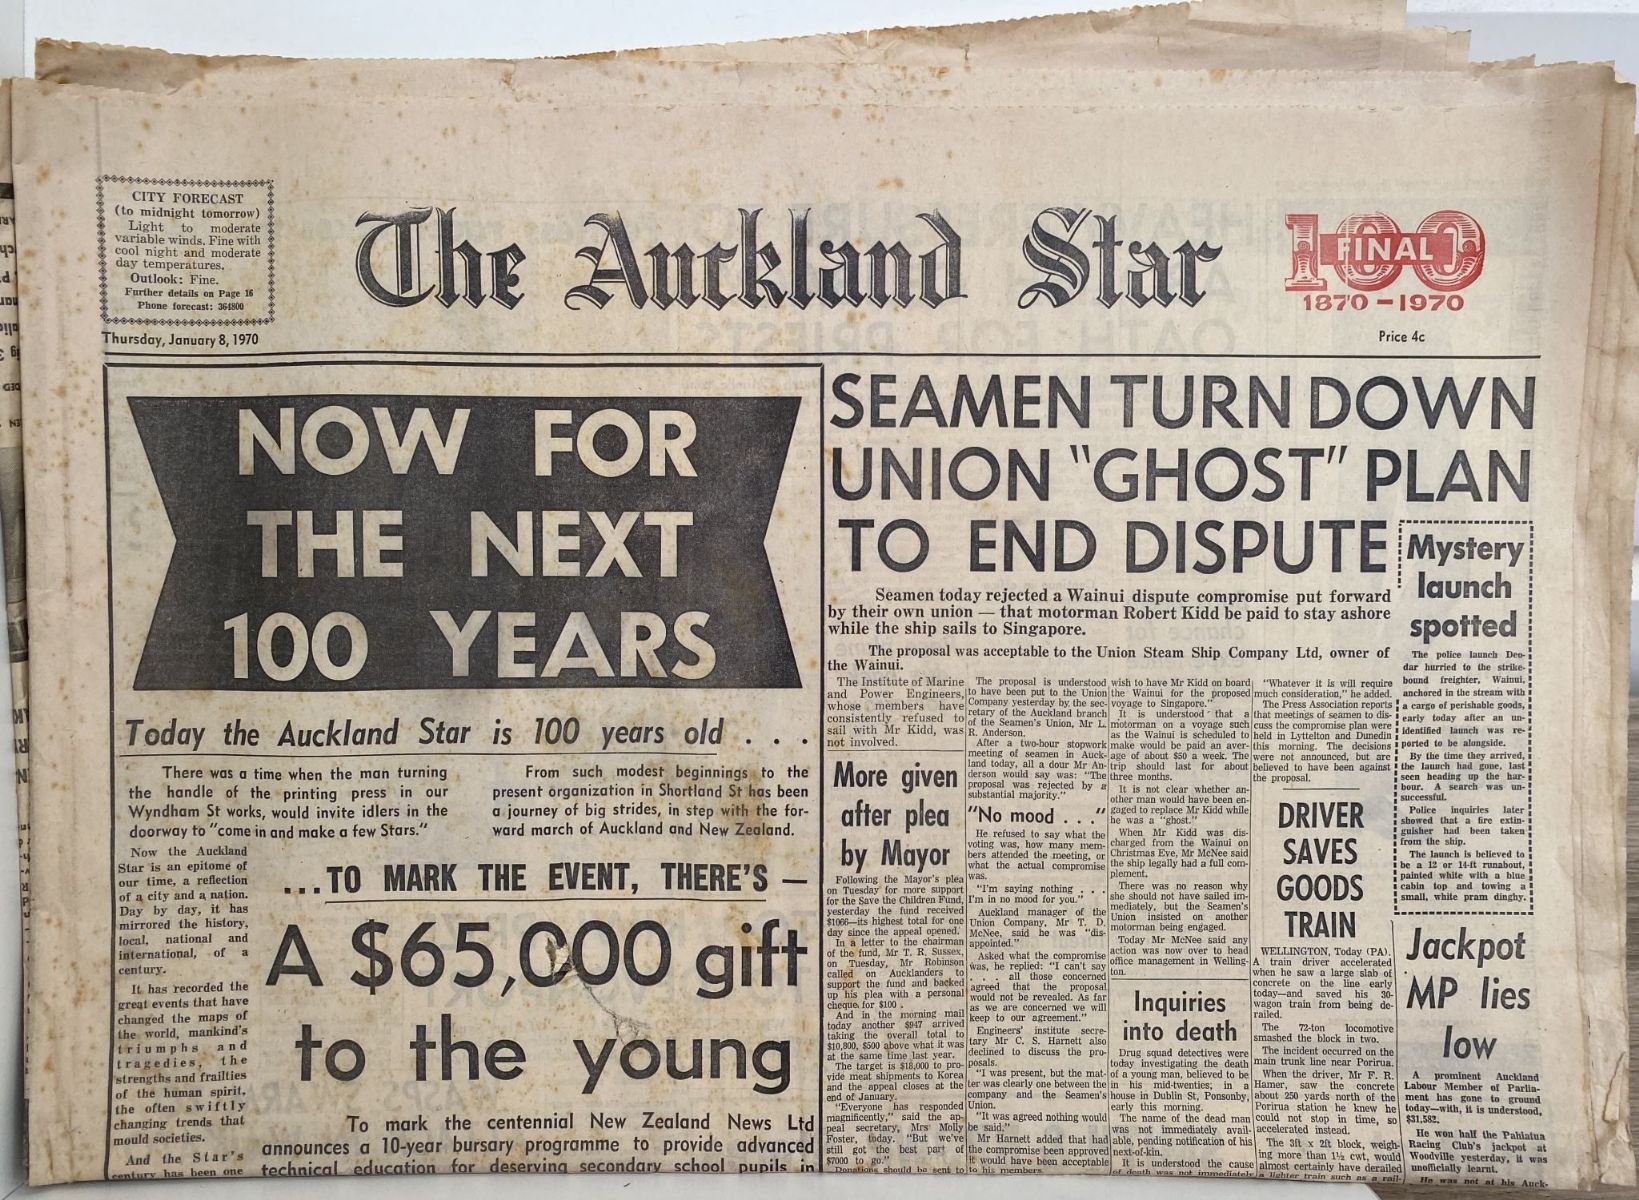 OLD NEWSPAPER: The Auckland Star, 8th January 1970 - 100 years old